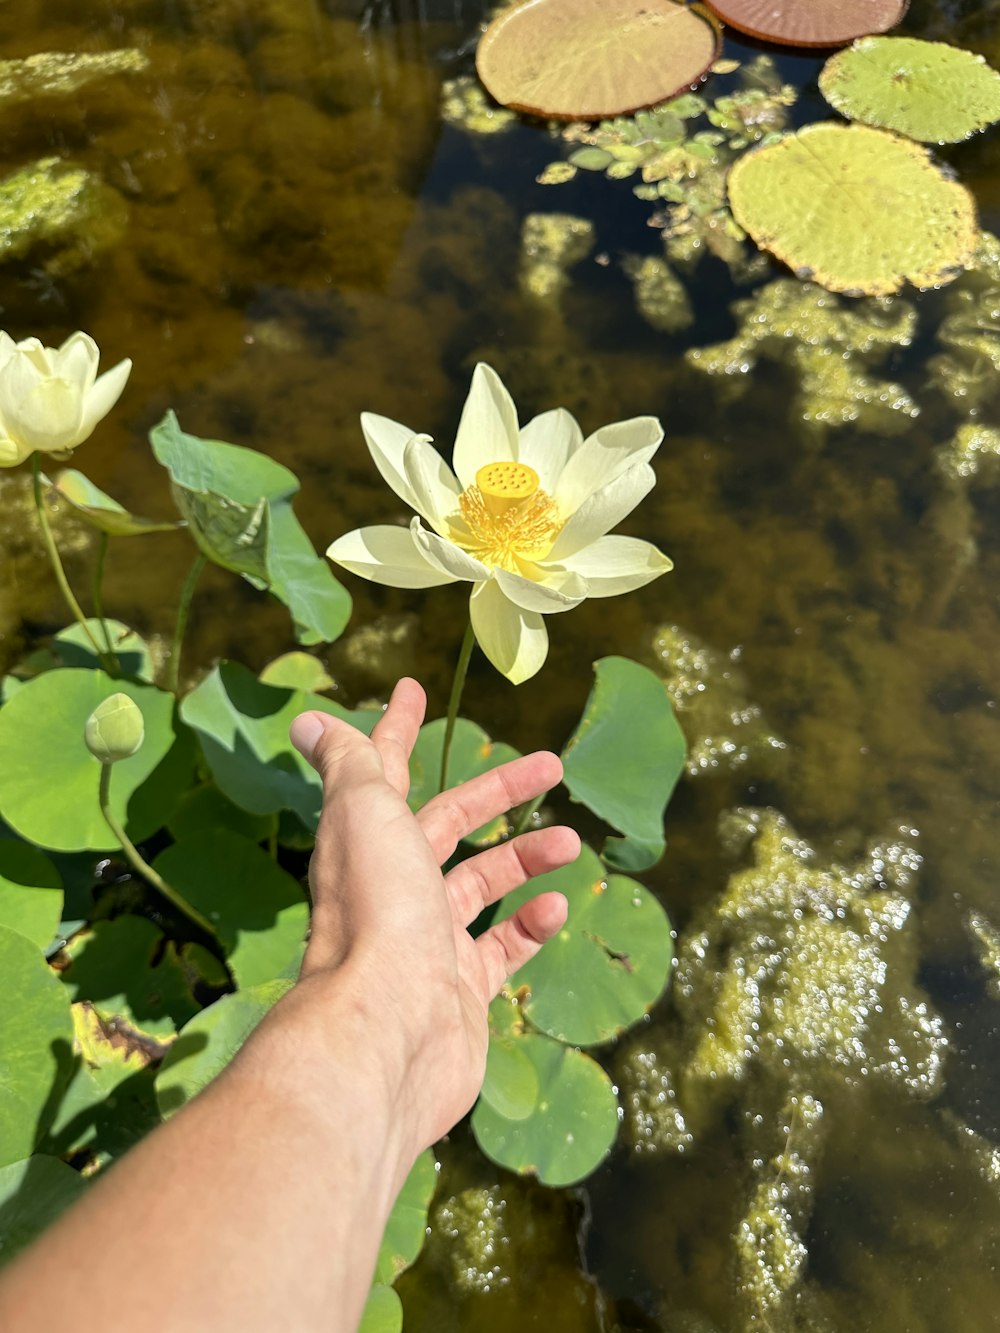 a hand reaching for a flower in a pond